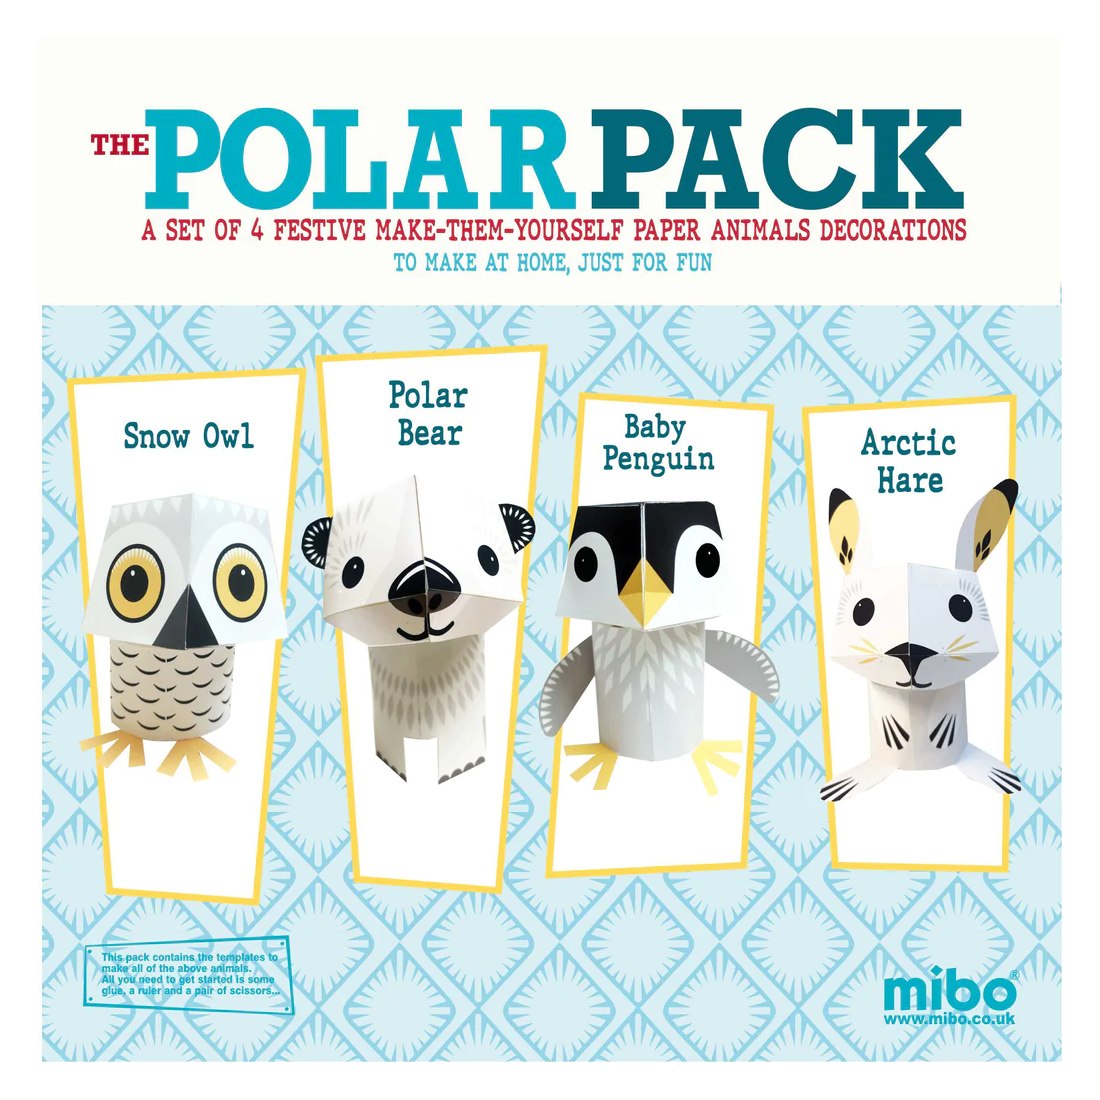 the polar pack paper animals kit by Mibo